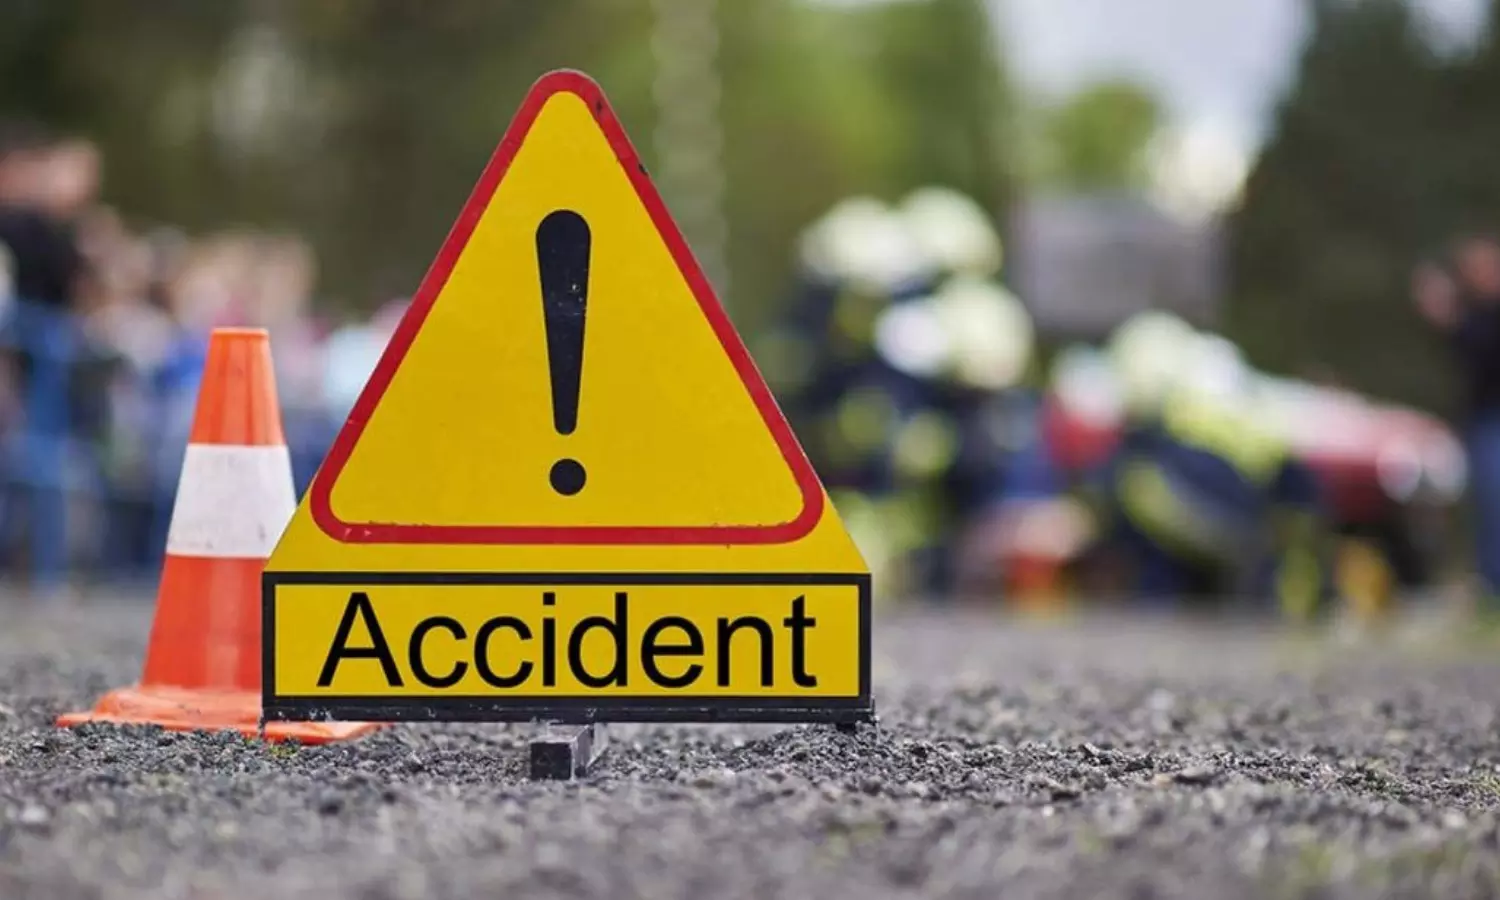 27-year-old Malayali doctor killed in road accident in Pune